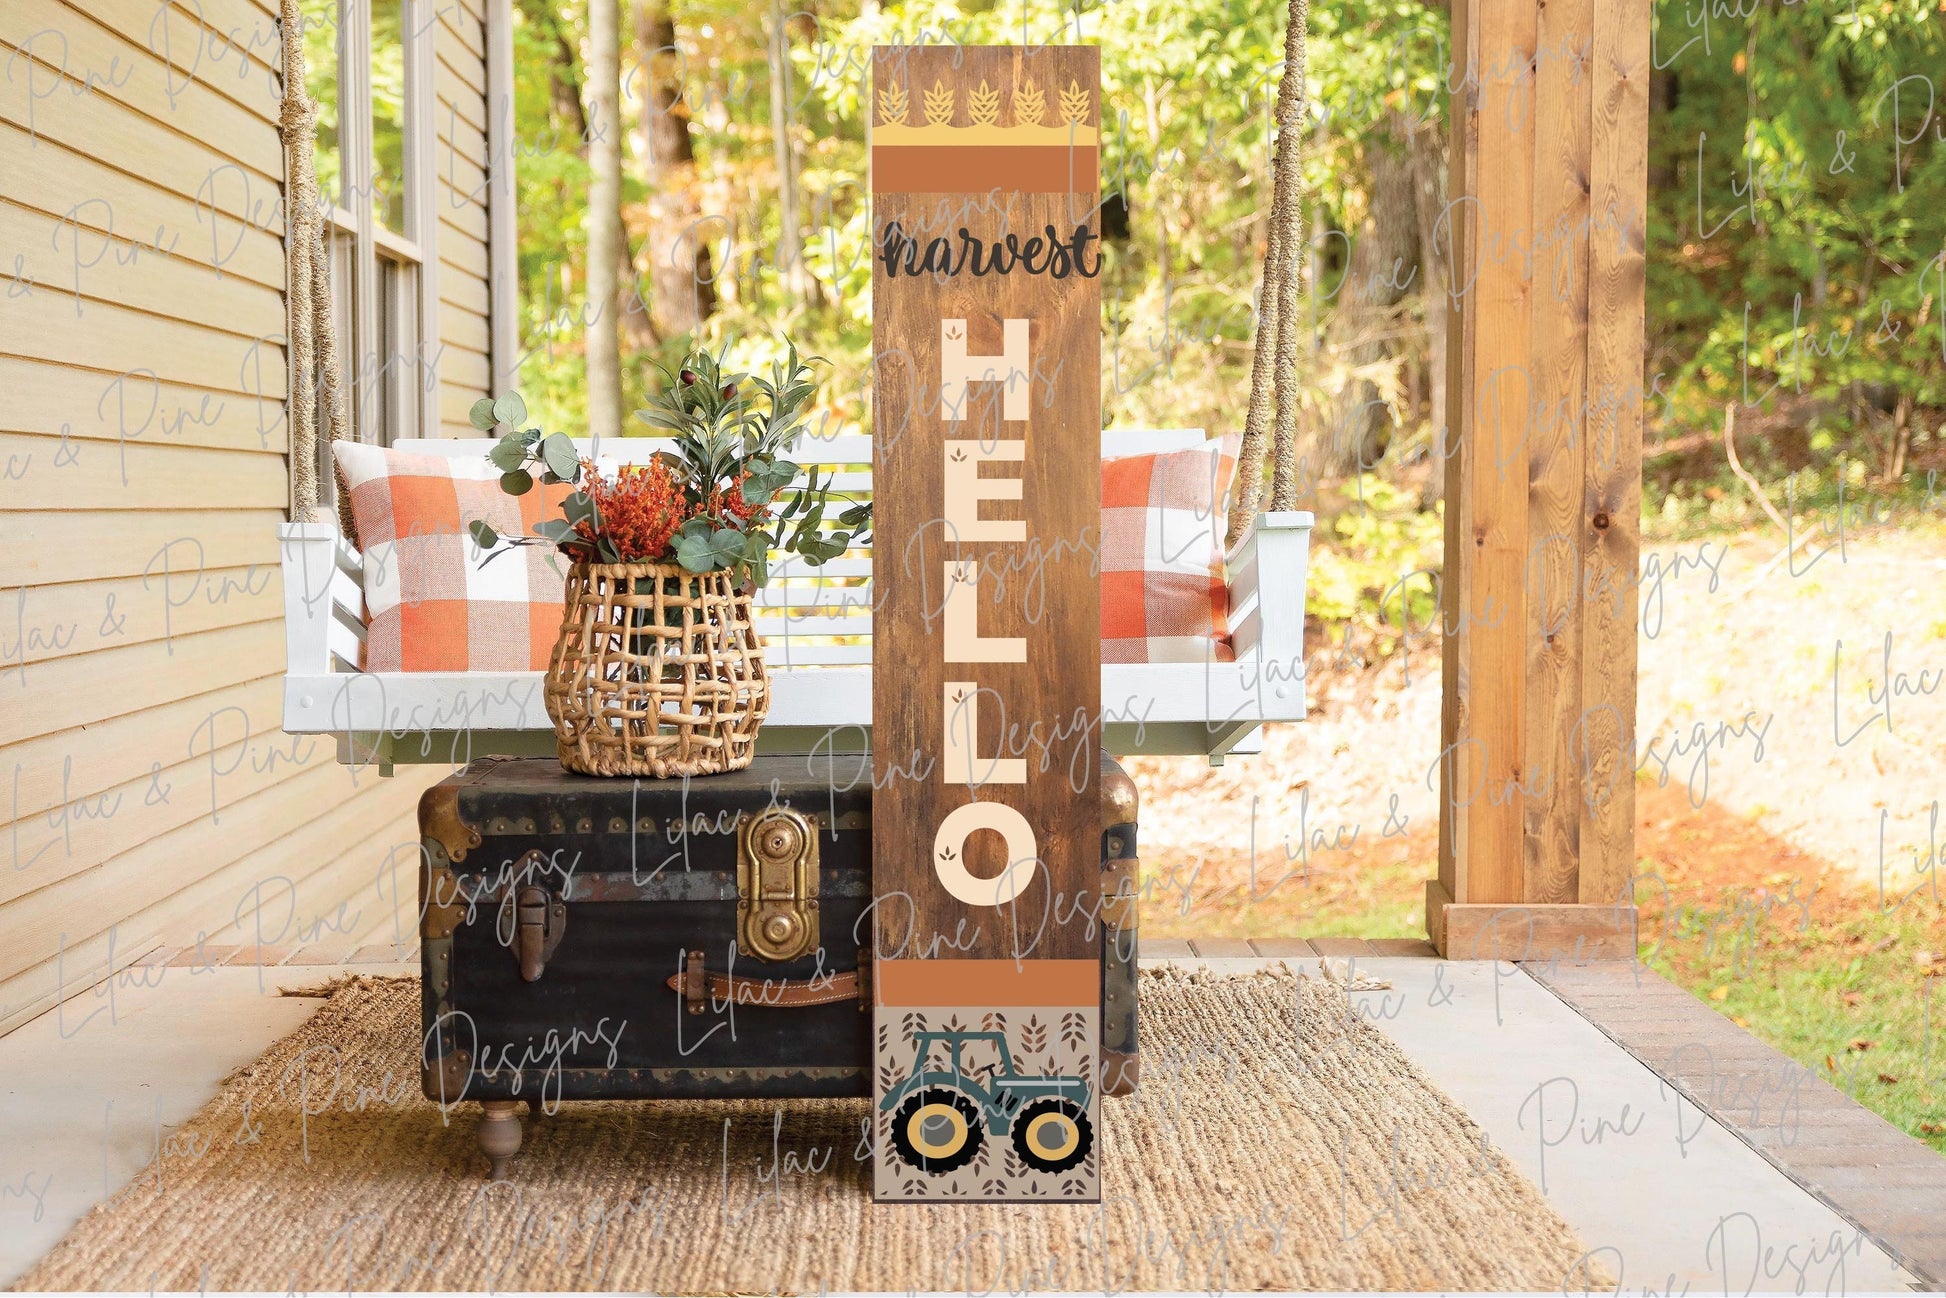 harvest hello sign SVG, Fall porch sign SVG, Autumn porch leaner, tractor welcome sign svg, fall porch decor, Glowforge SVG, laser cut file